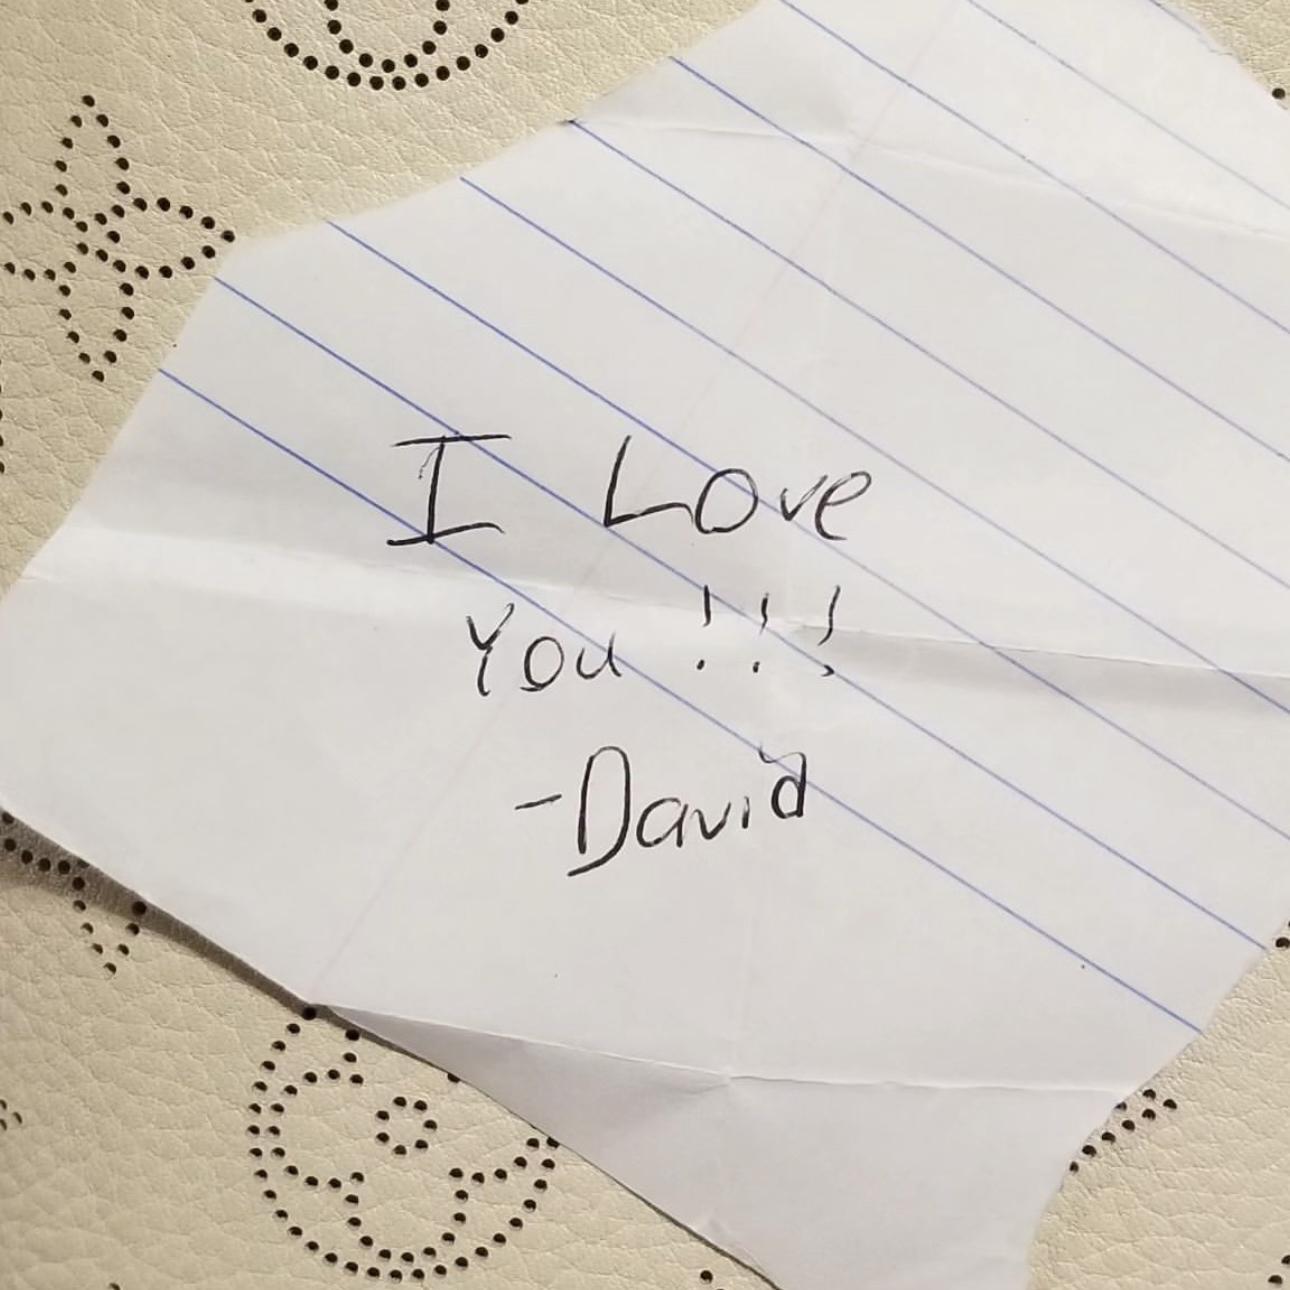 a note that Sarah’s mom found that David left in her pencil case in highschool